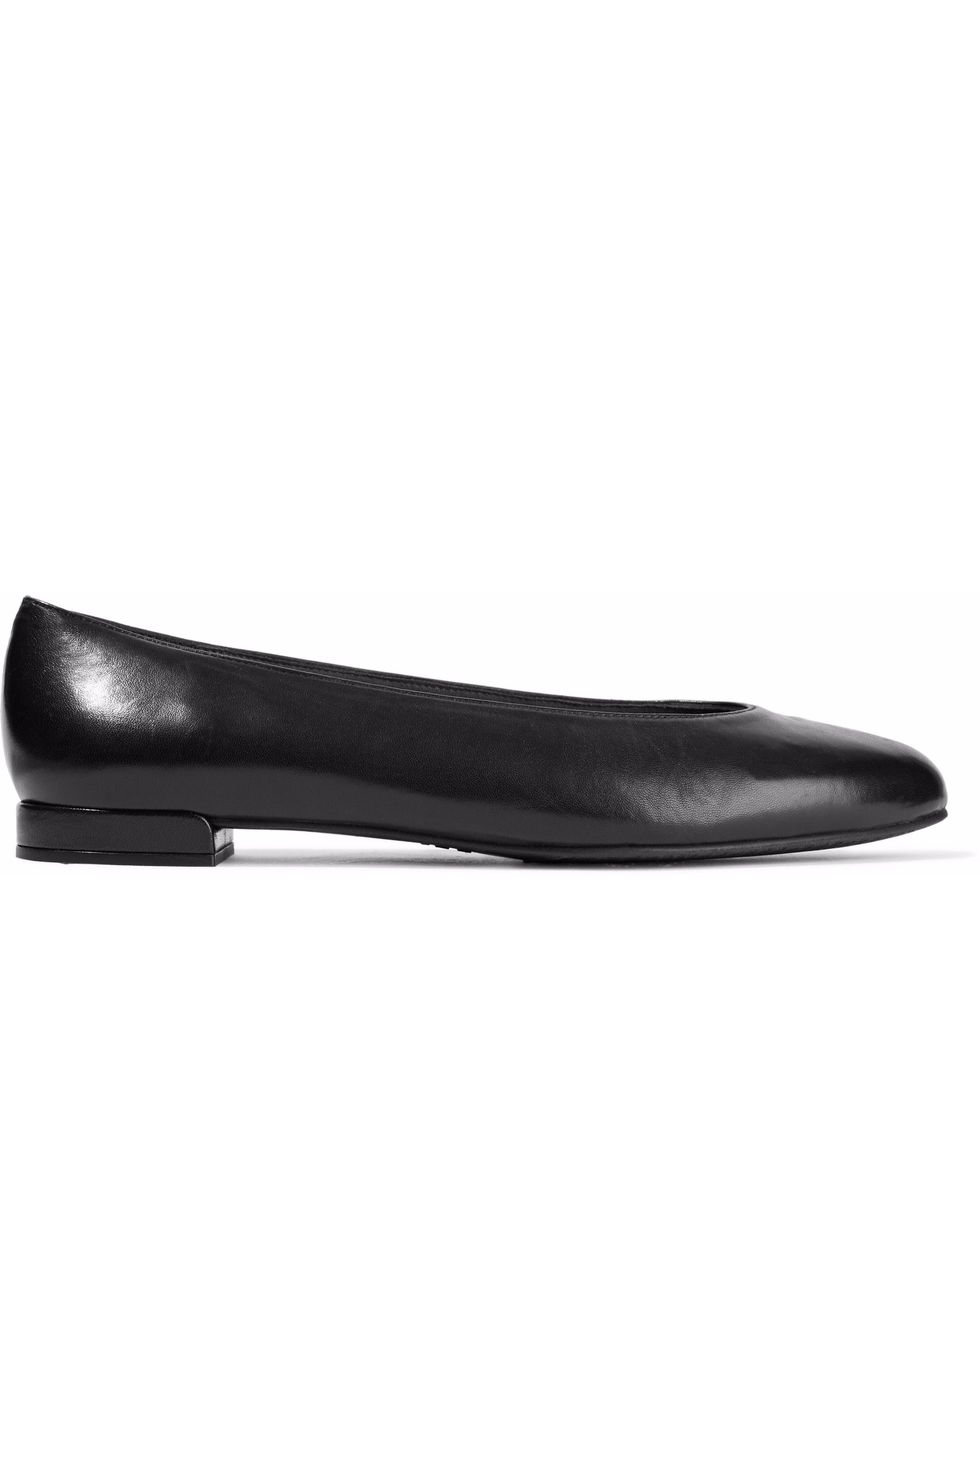 Chic Leather Ballet Flats